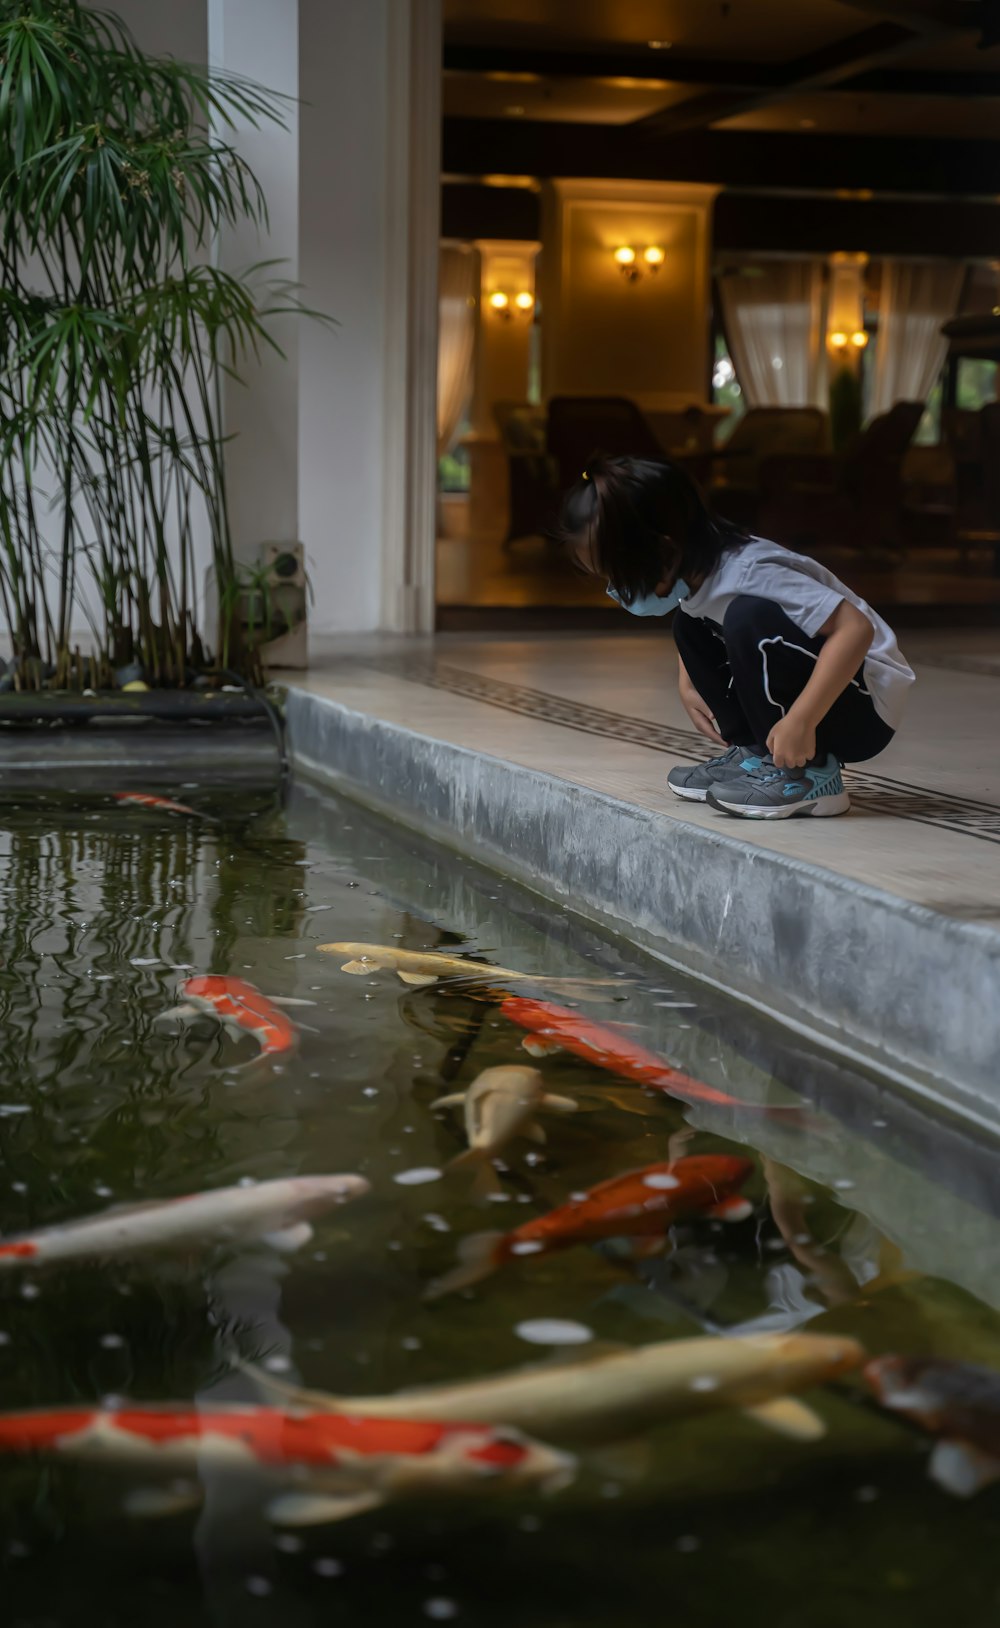 a person kneeling down next to a pond filled with fish